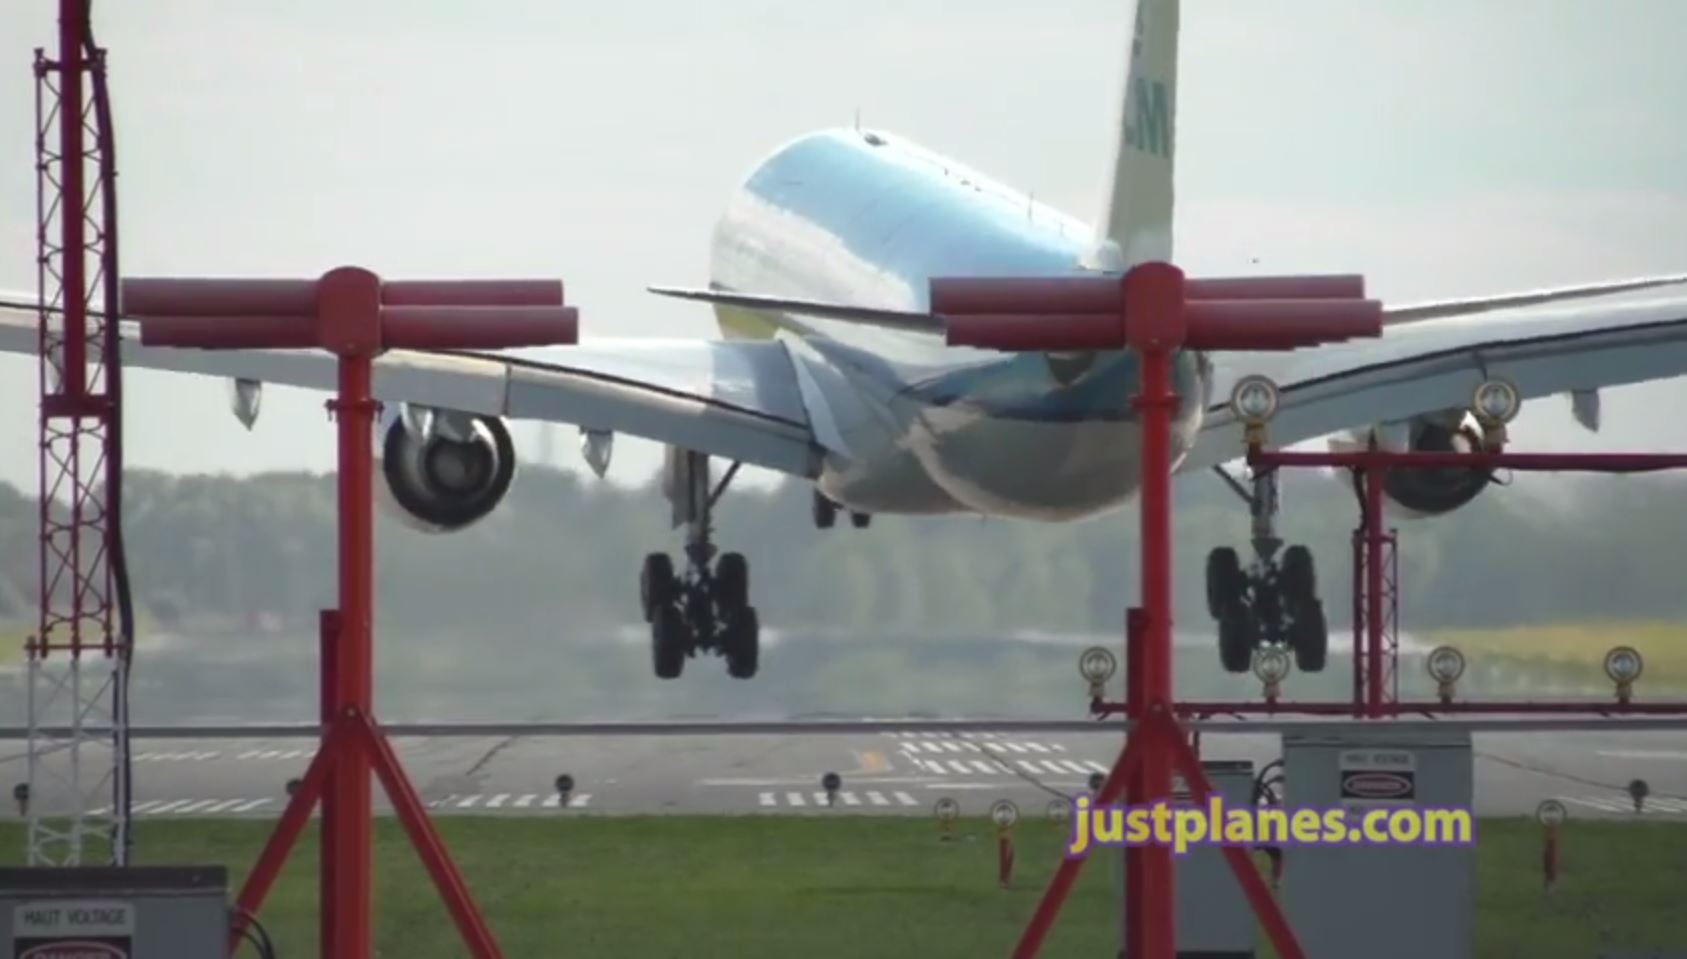 KLM A330 almost ends up in grass after landing